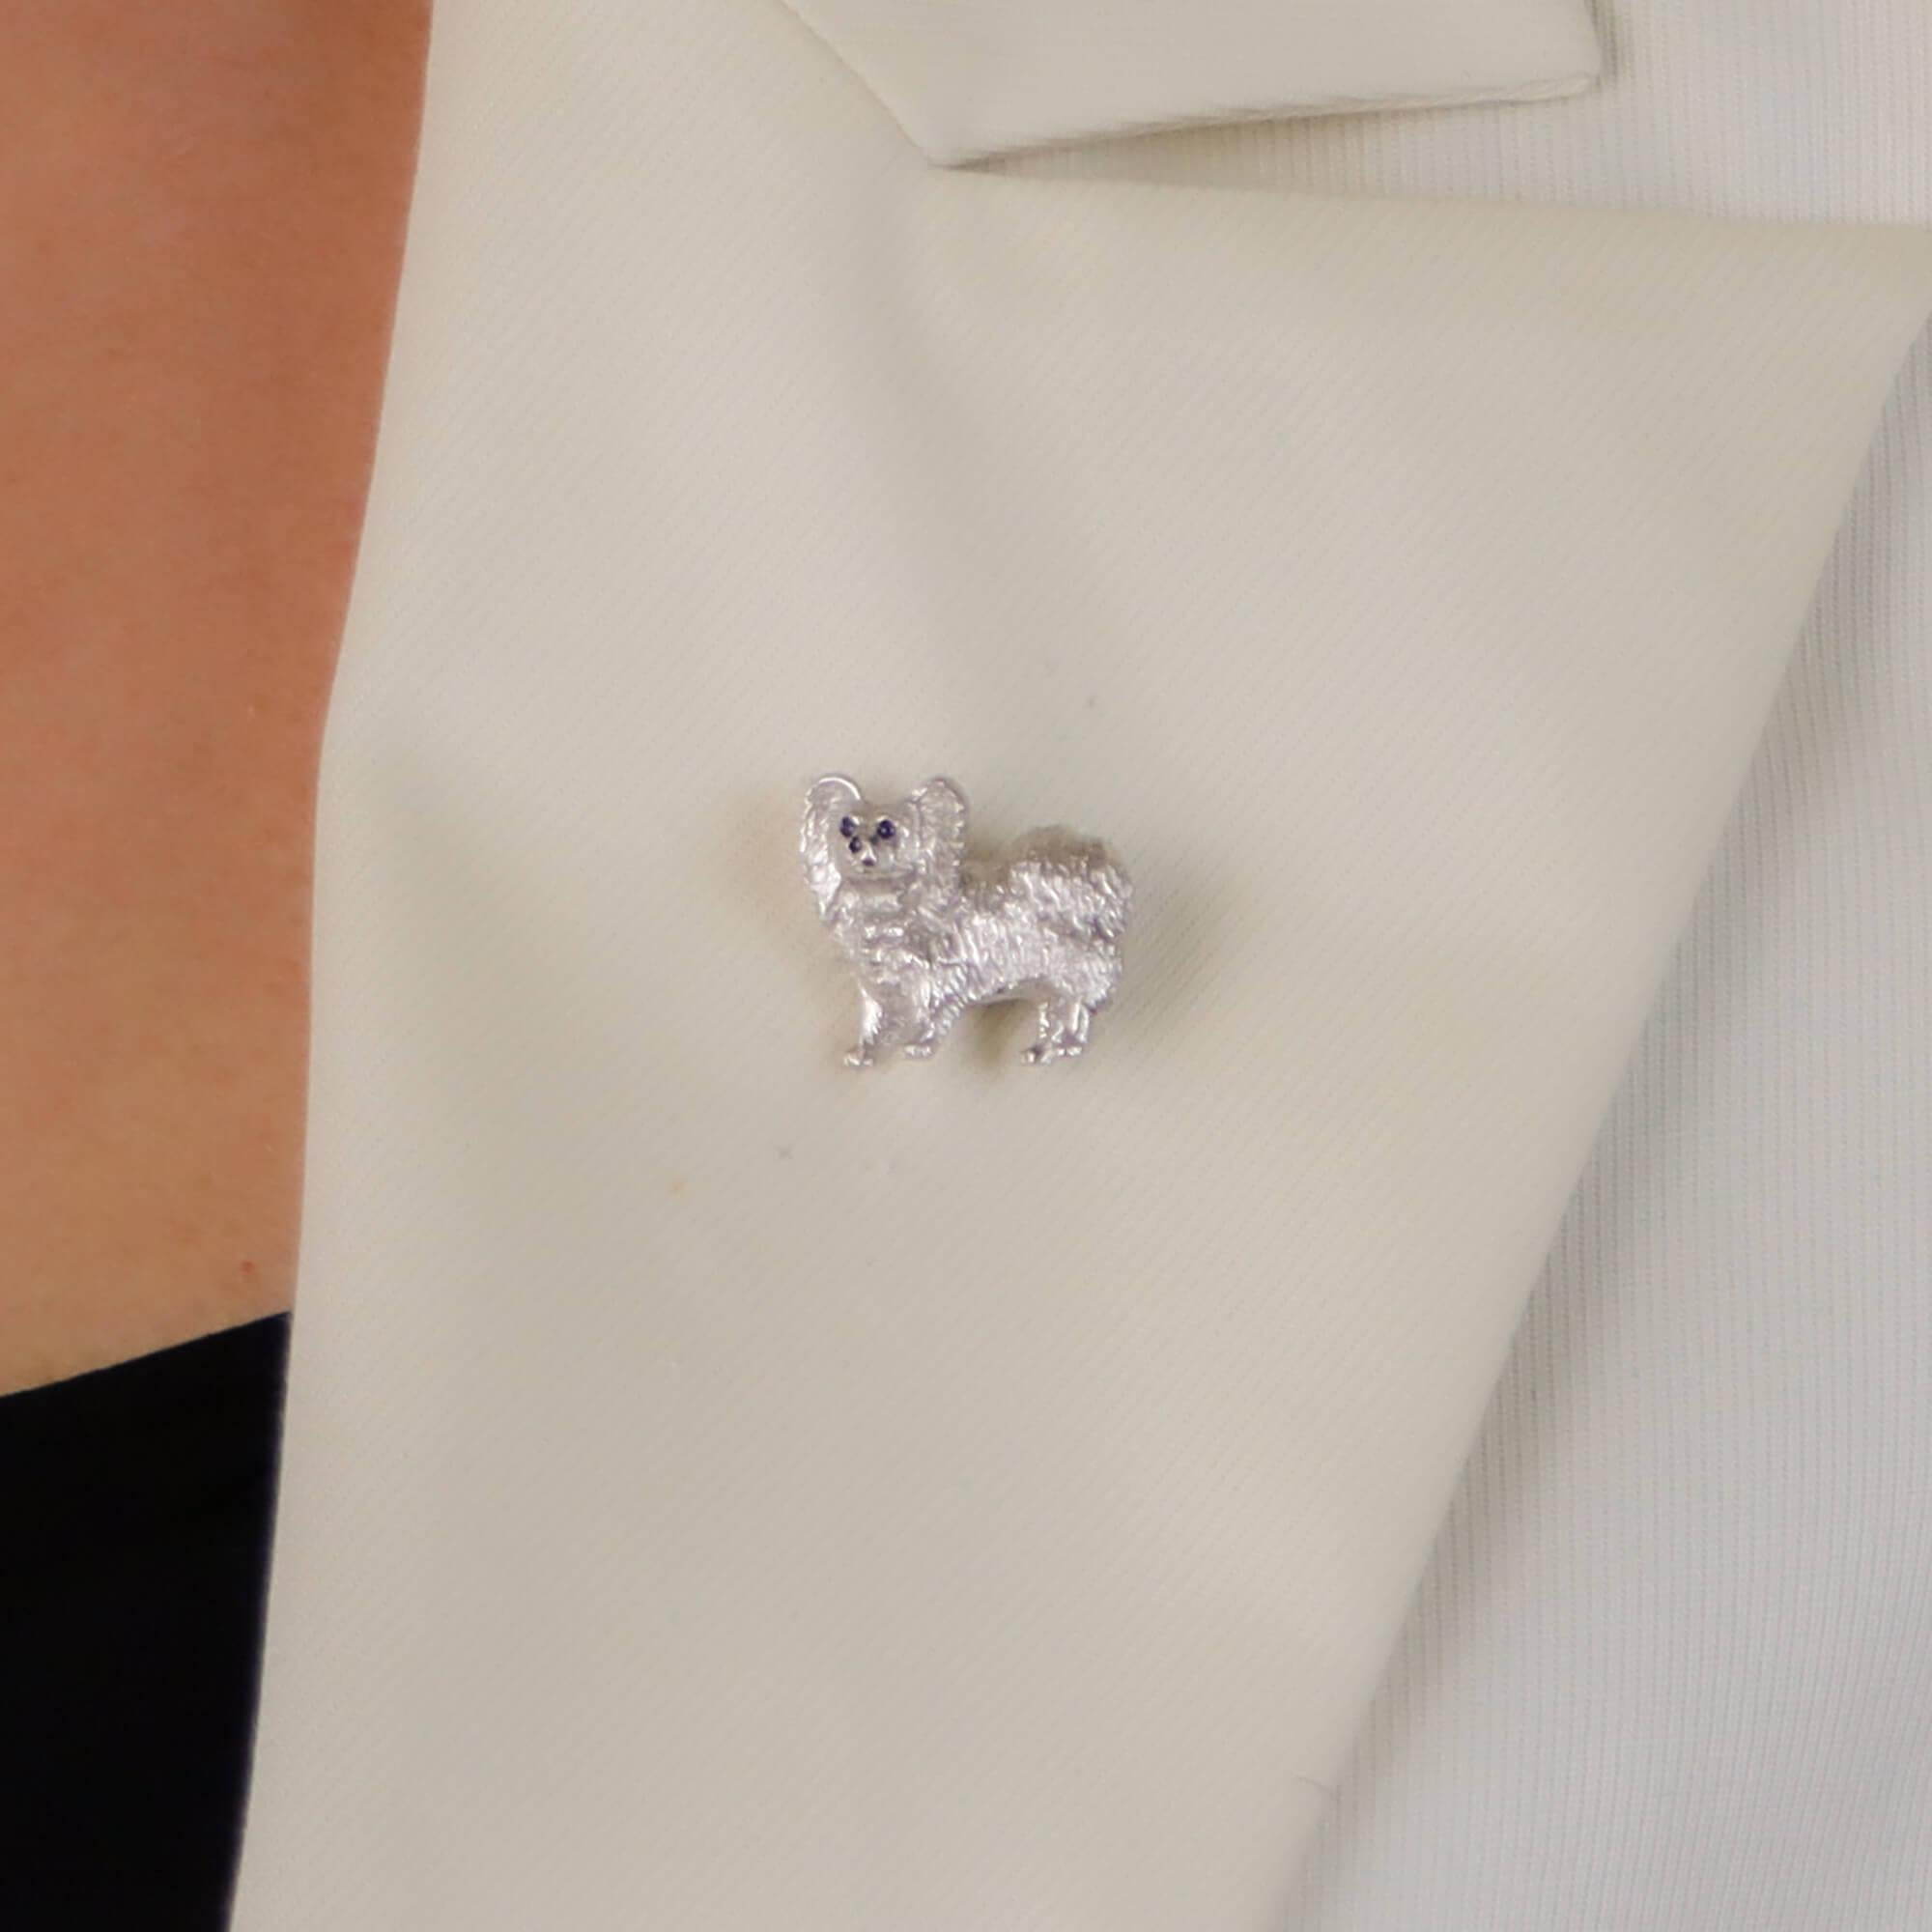 A beautiful sapphire and diamond Papillon dog pin brooch set in 18k white gold.

The brooch depicts a standing Papillon dog which is pavé set on the chest with 3 round brilliant cut diamonds. The dogs fur has been hand carved in 18k white gold to